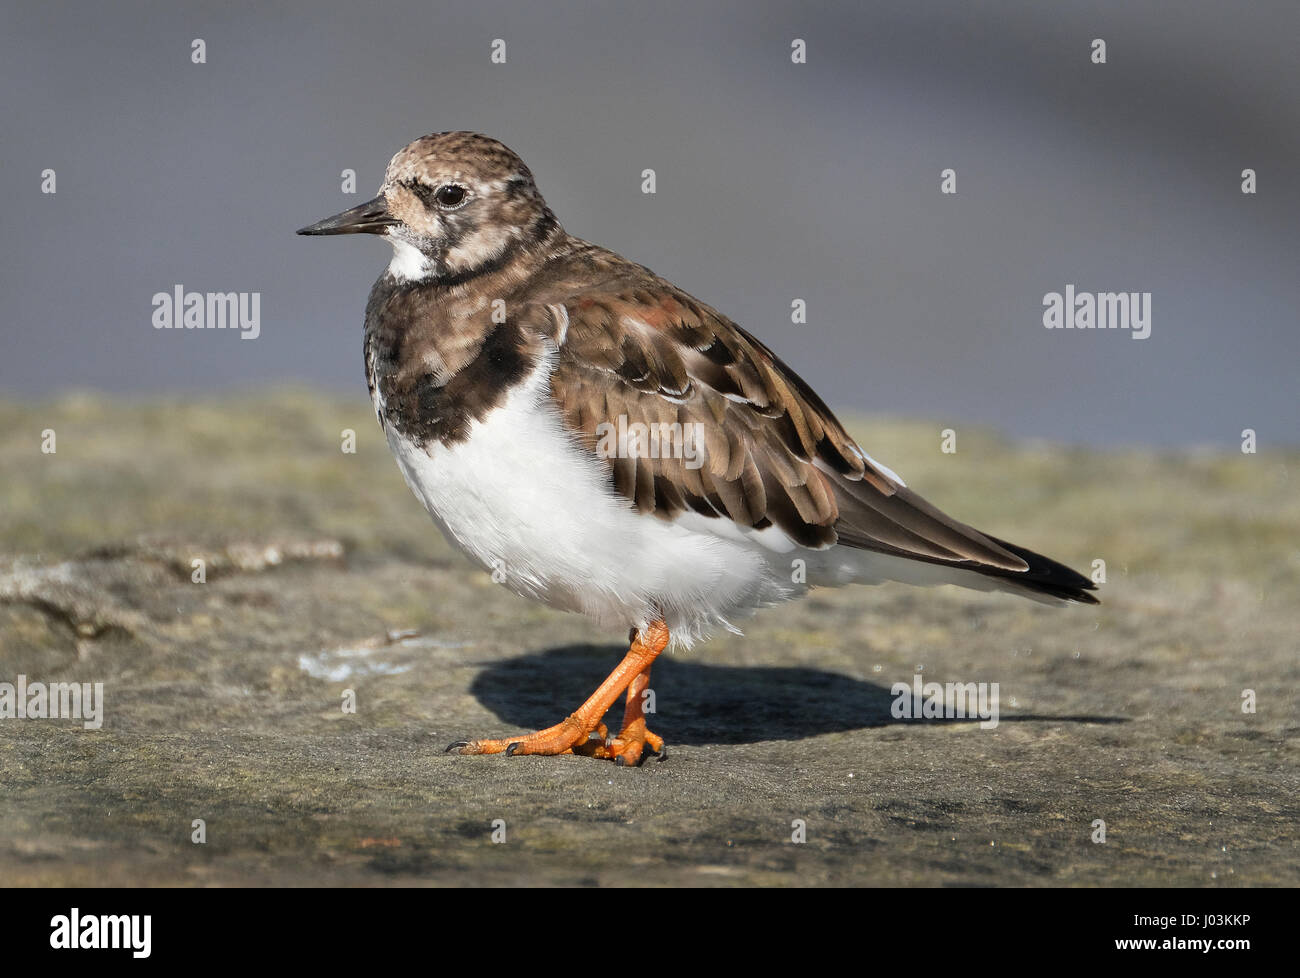 Turnstones are two bird species that comprise the genus Arenaria in the family Scolopacidae. They are closely related to calidrid sandpipers and might Stock Photo